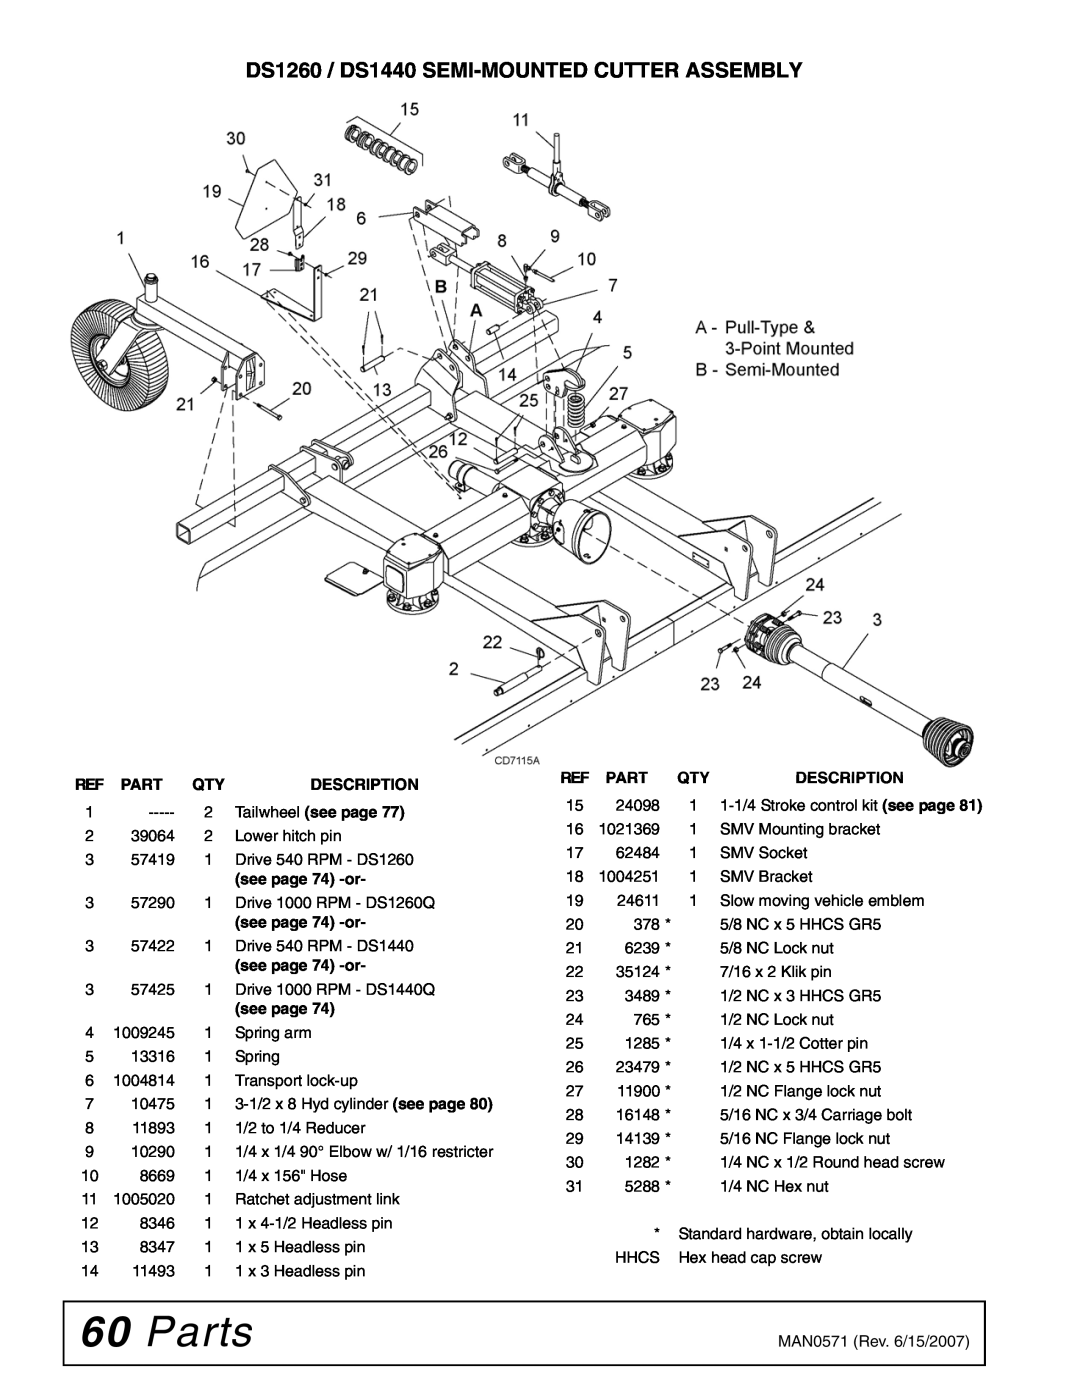 Woods Equipment DSO1260Q, DS1440Q Parts, DS1260 / DS1440 SEMI-MOUNTED CUTTER ASSEMBLY, Description, Tailwheel see page 